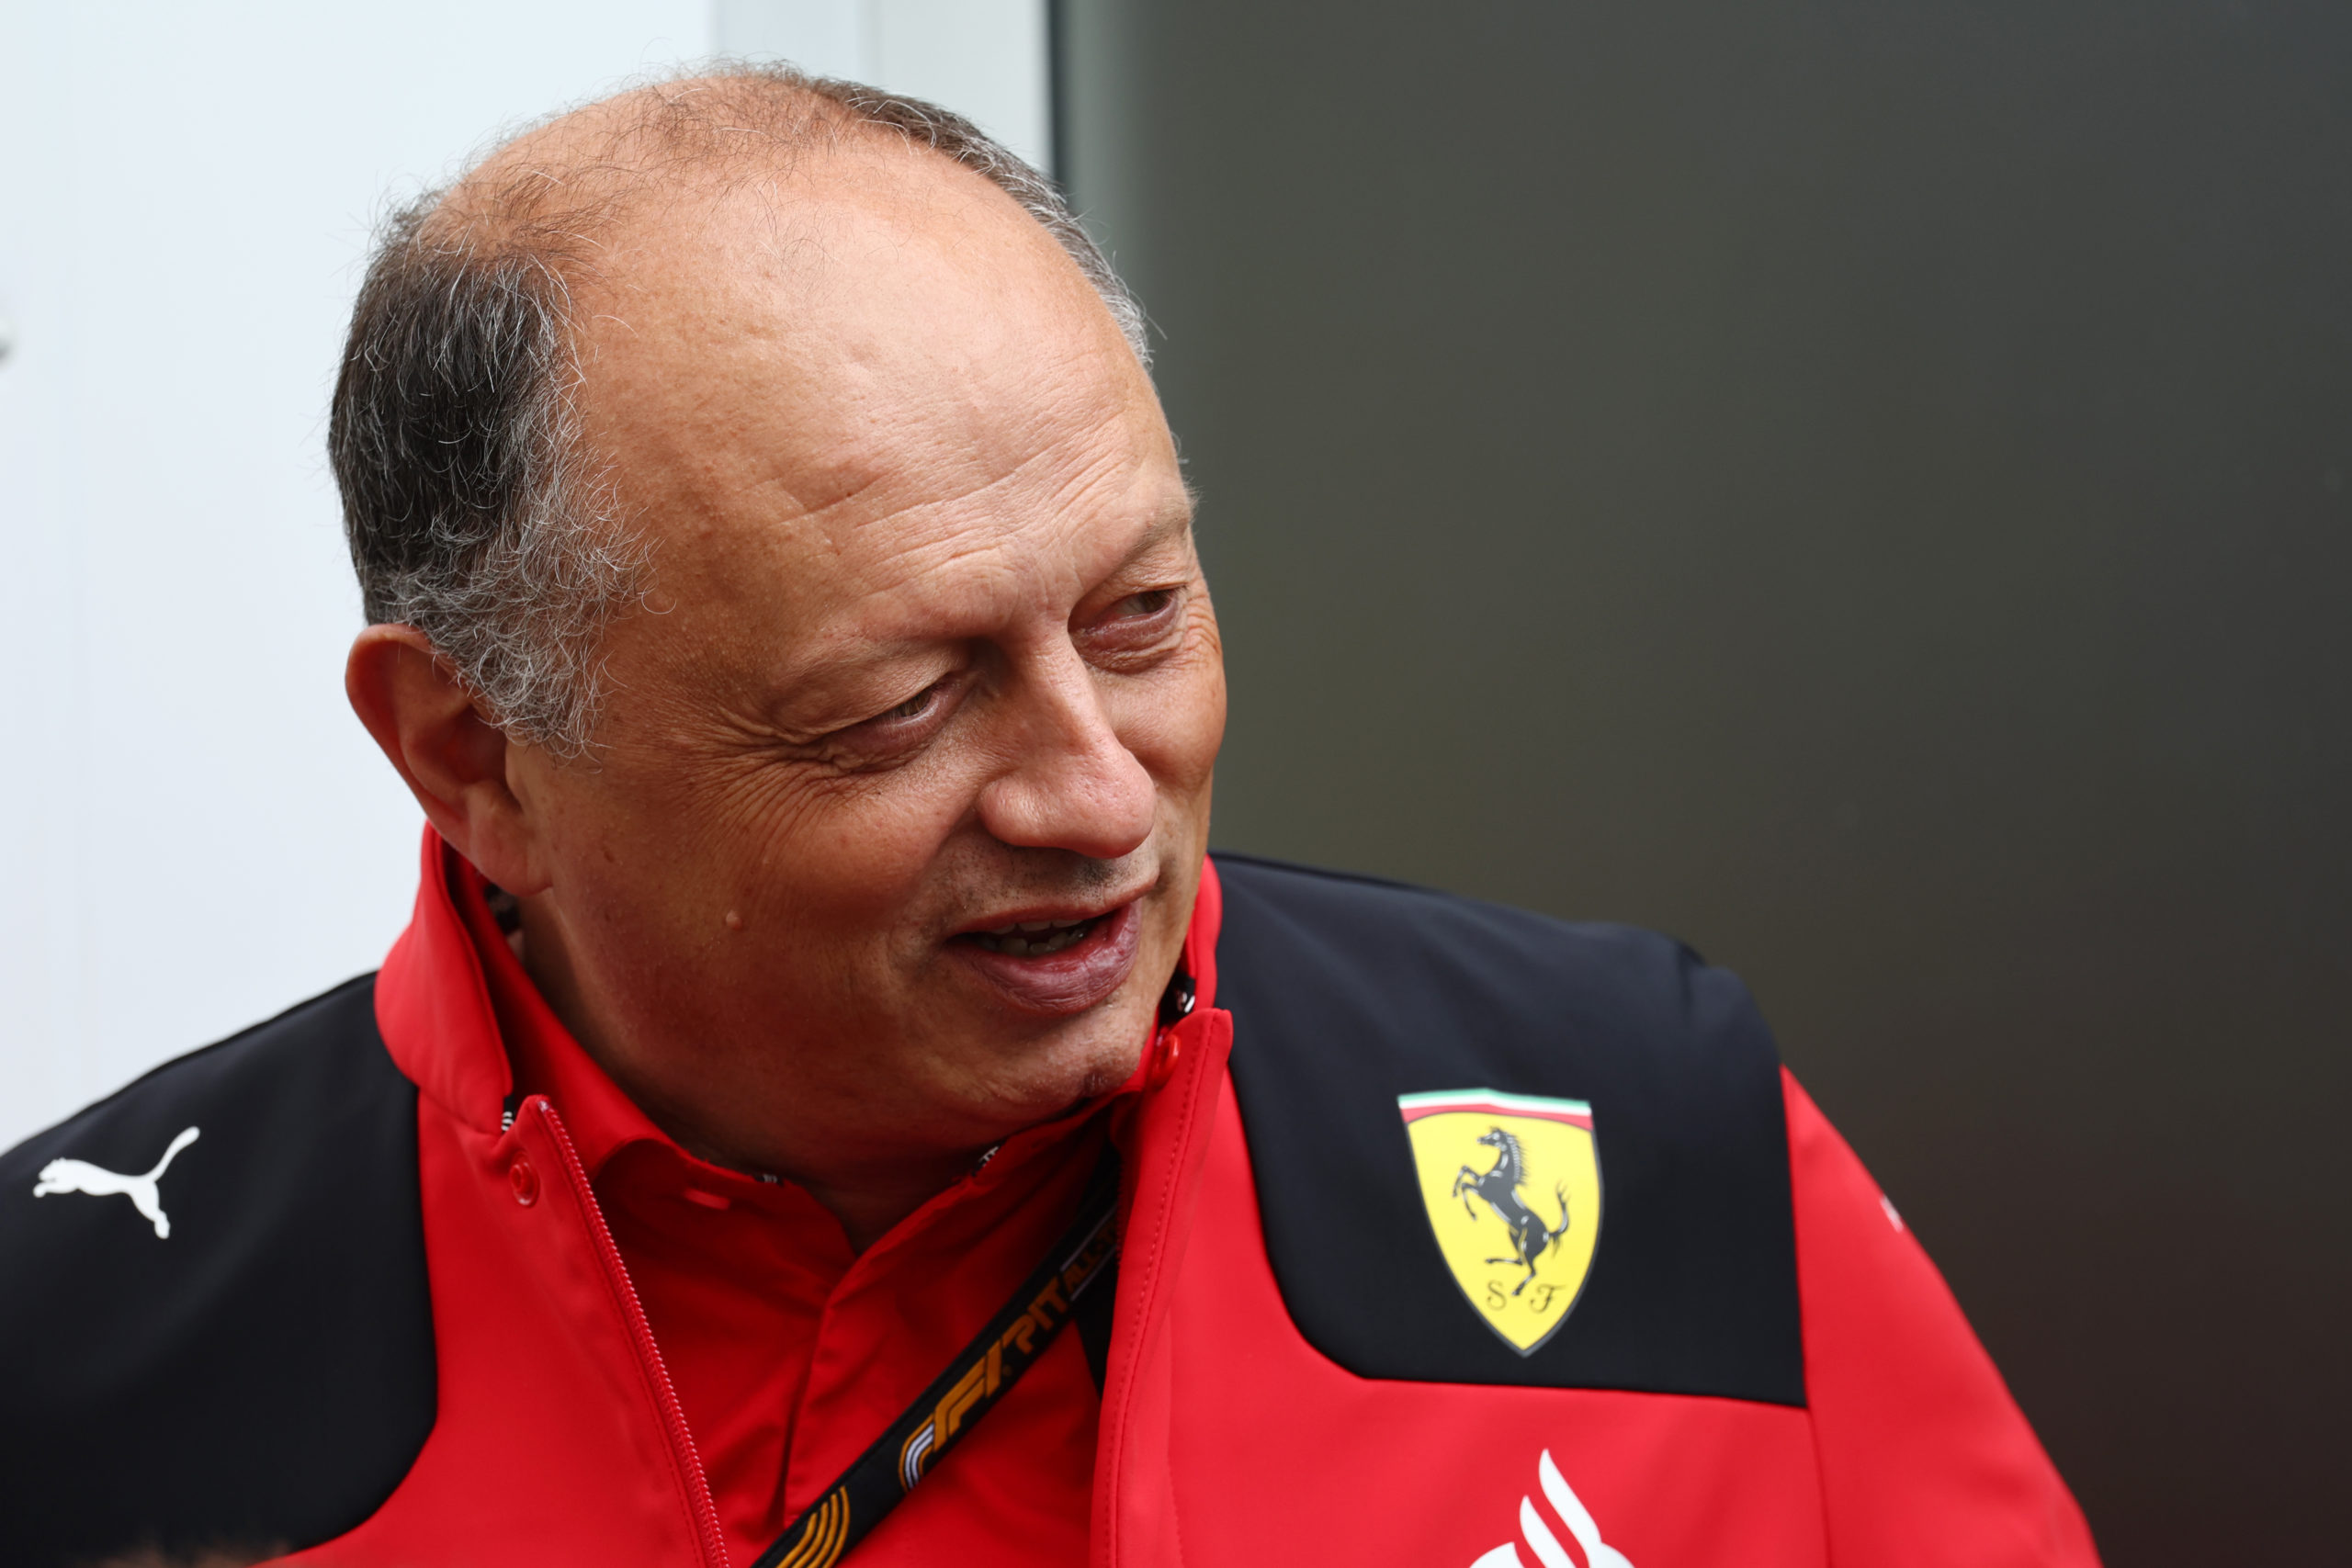 only ‘two of 1000+’ – ferrari’s answer to staff exit criticism